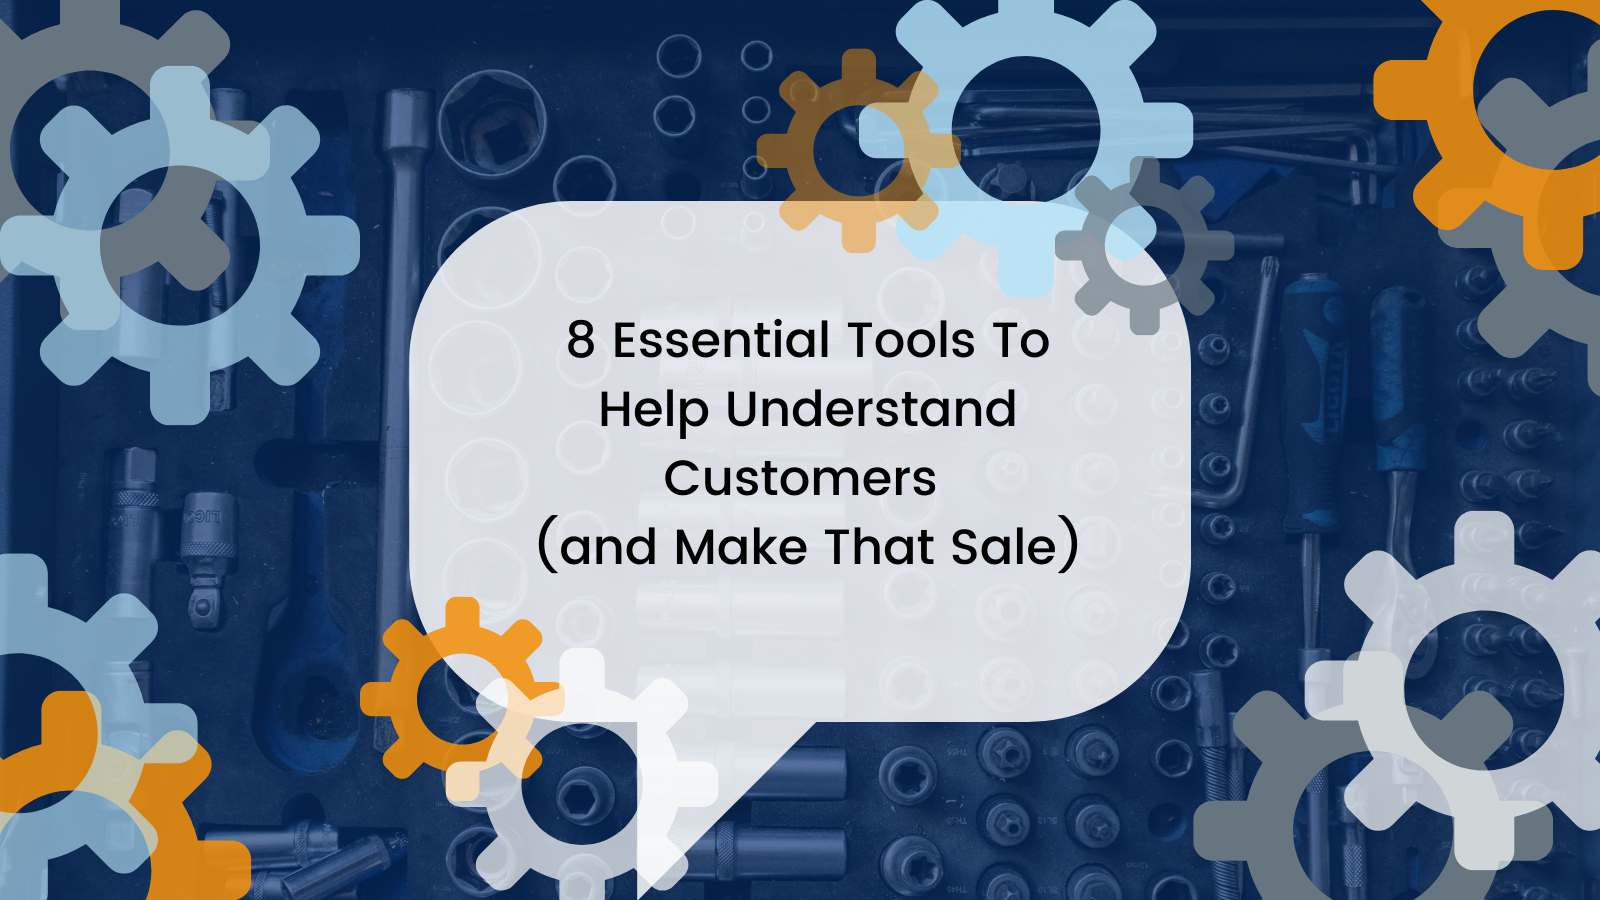 8 Essential Tools To Help Understand Customers (and Make That Sale)